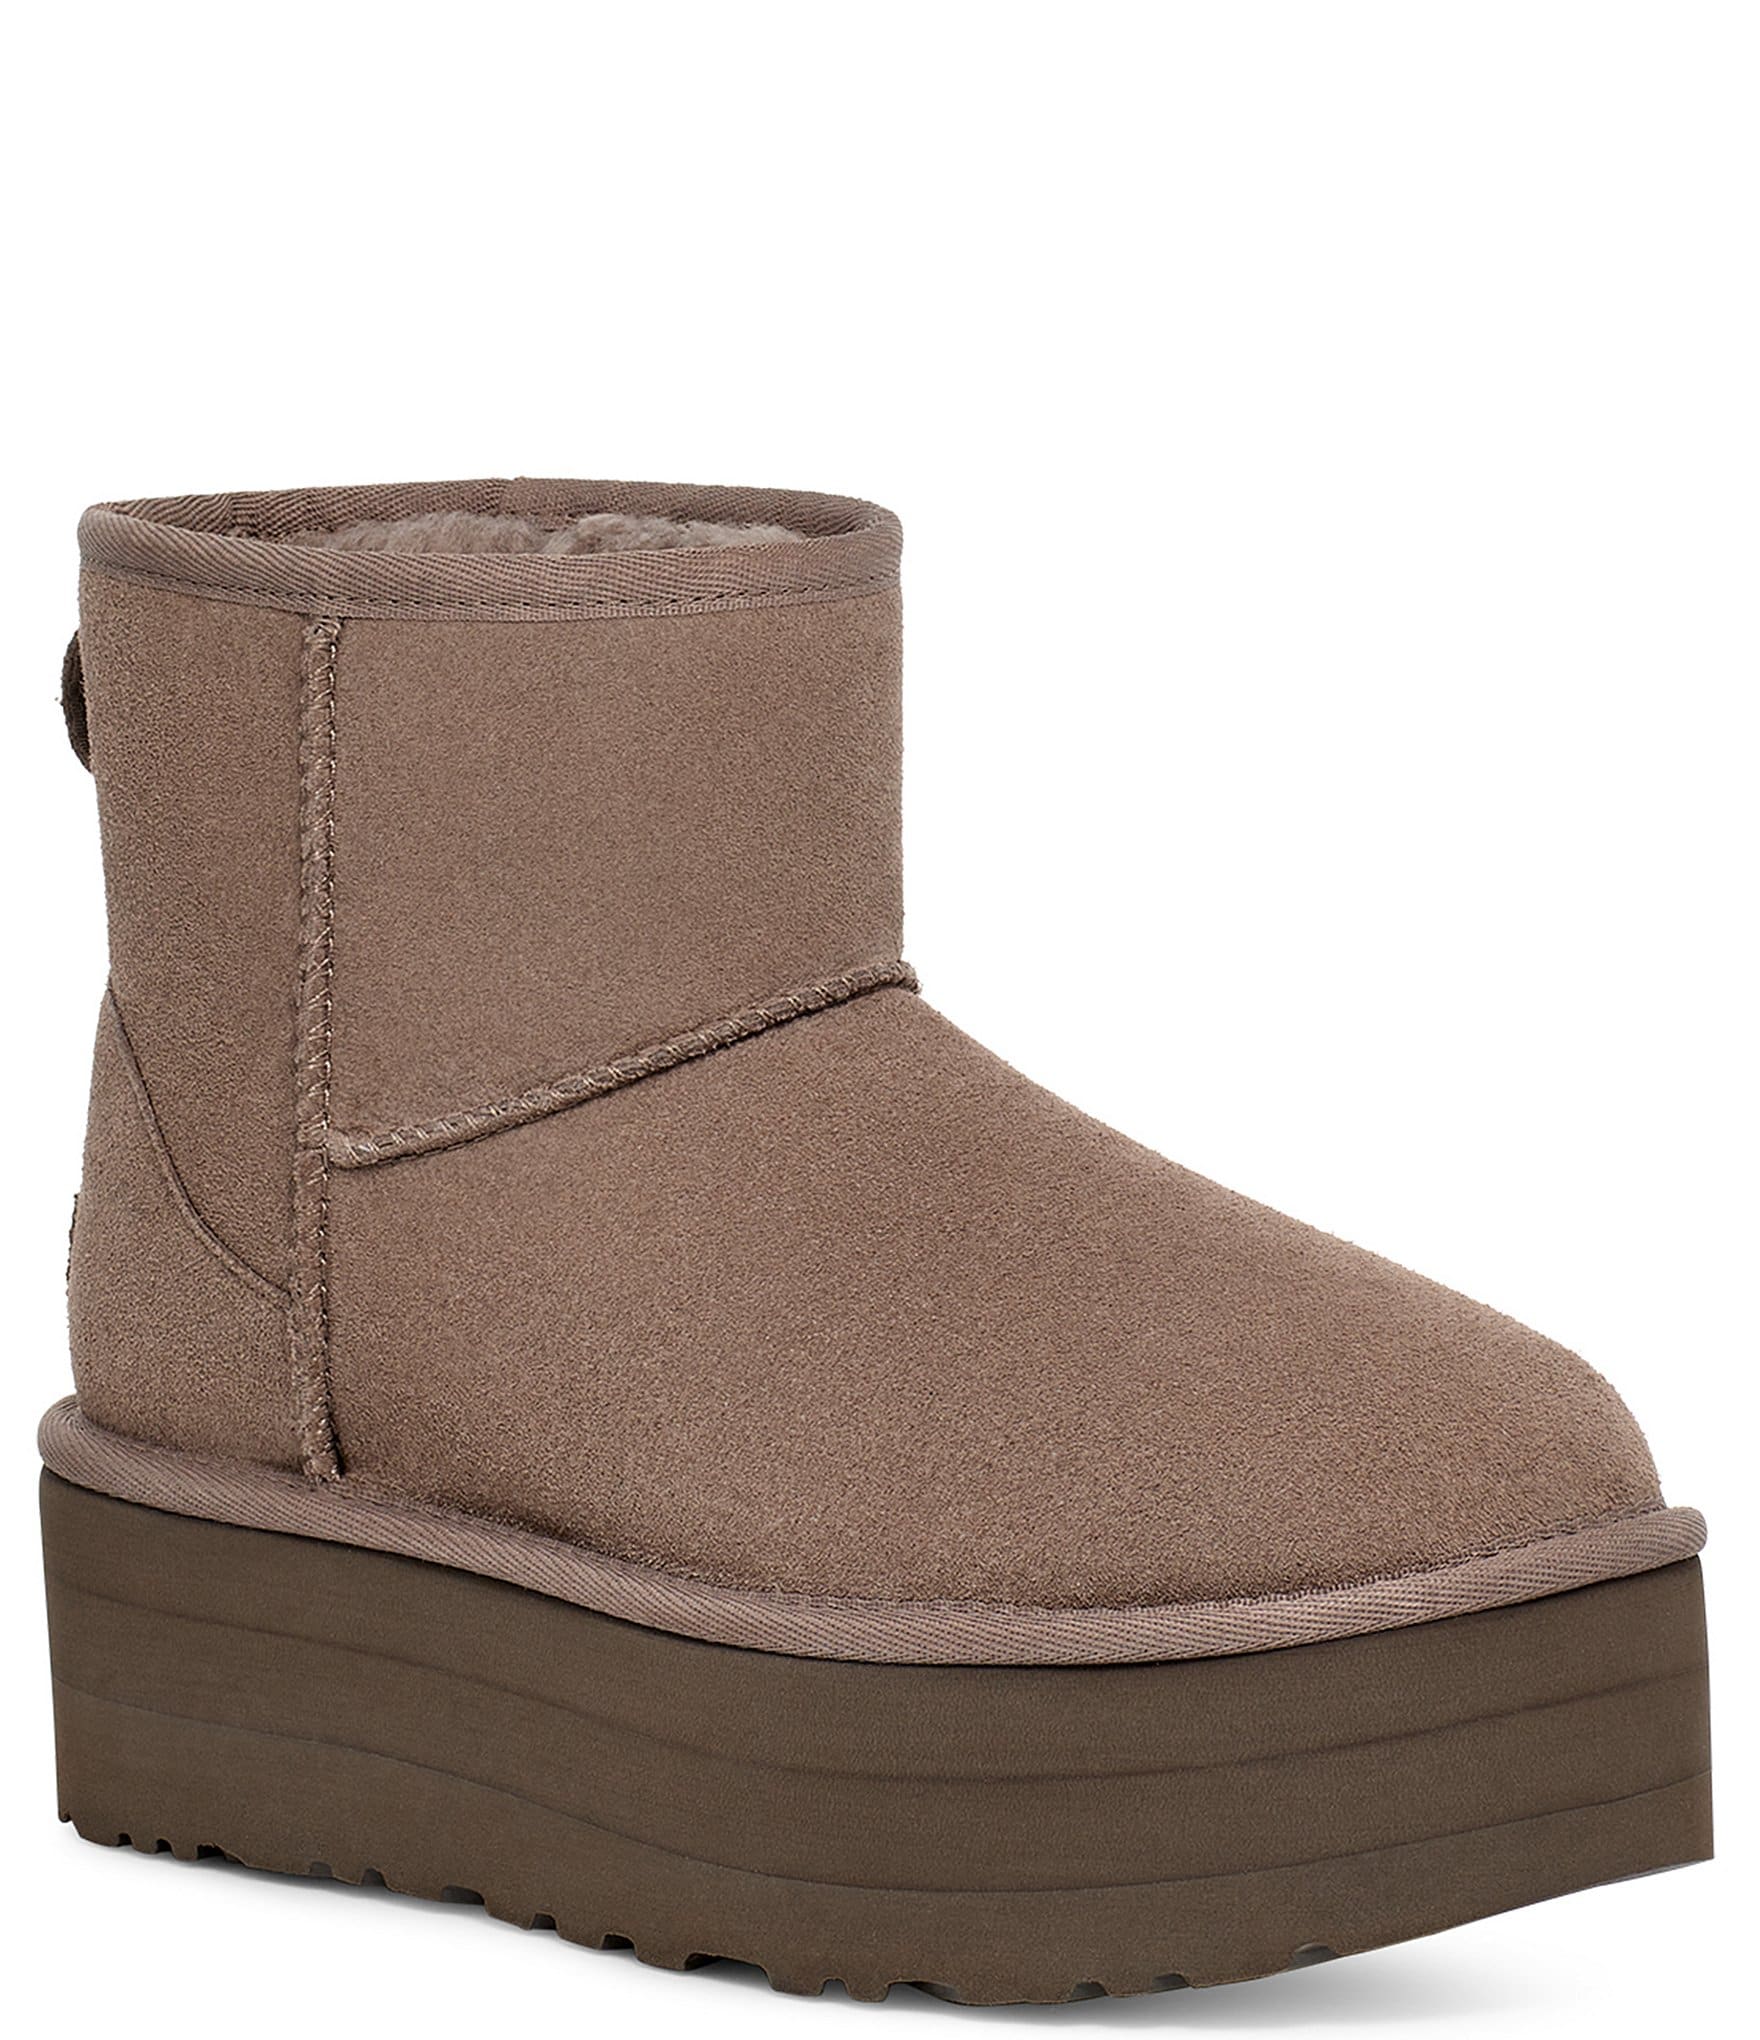 Lucky Brand Branndi Leather Side Dip Booties